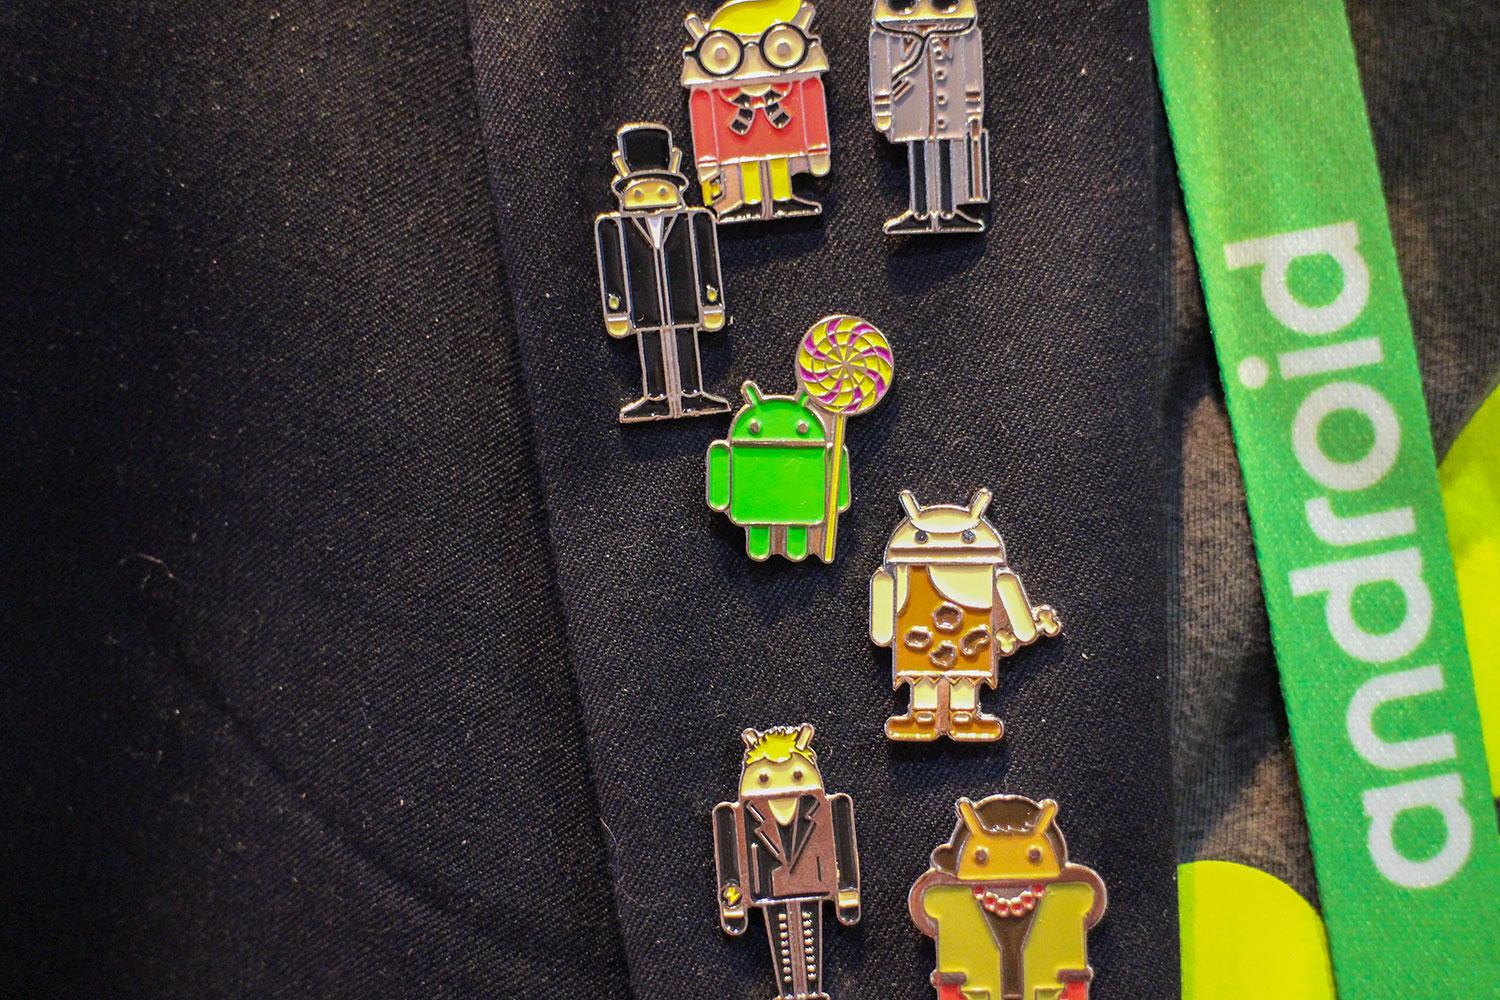 mwc 2015 android pin collecting pins 26